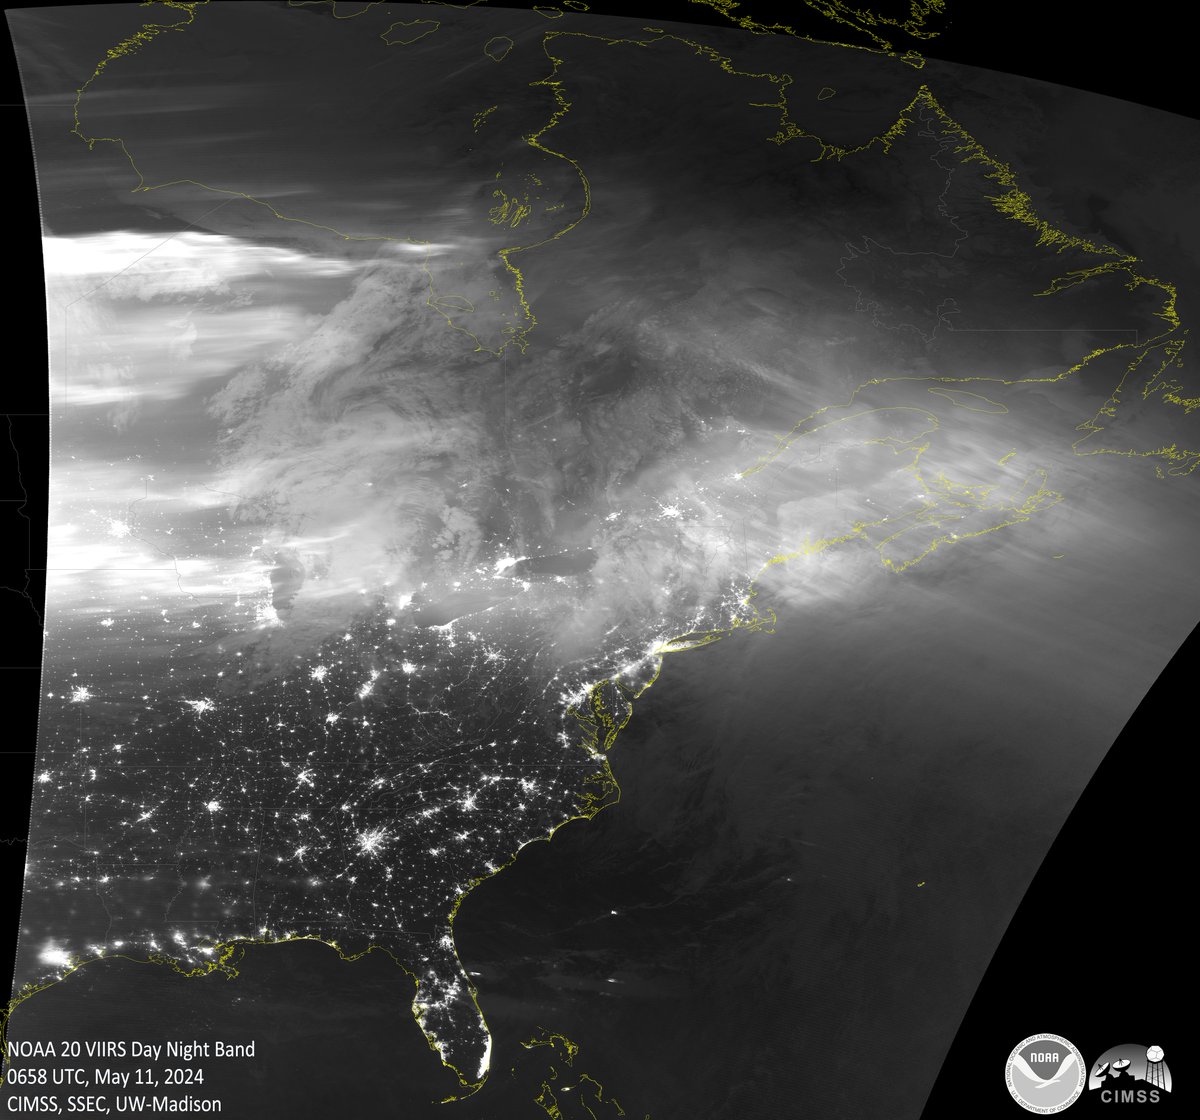 The G5 #AuroraBorealis from space last night at 2am CDT. So incredibly bright and wide blanketing all of Canada and several U.S. northern tier states. Absolutely amazing. #WIwx #MIwx #OHwx #PAwx #NYwx #VTwx #NHwx #MAwx More satellite views of this event at cimss.ssec.wisc.edu/viirs/imagery-…